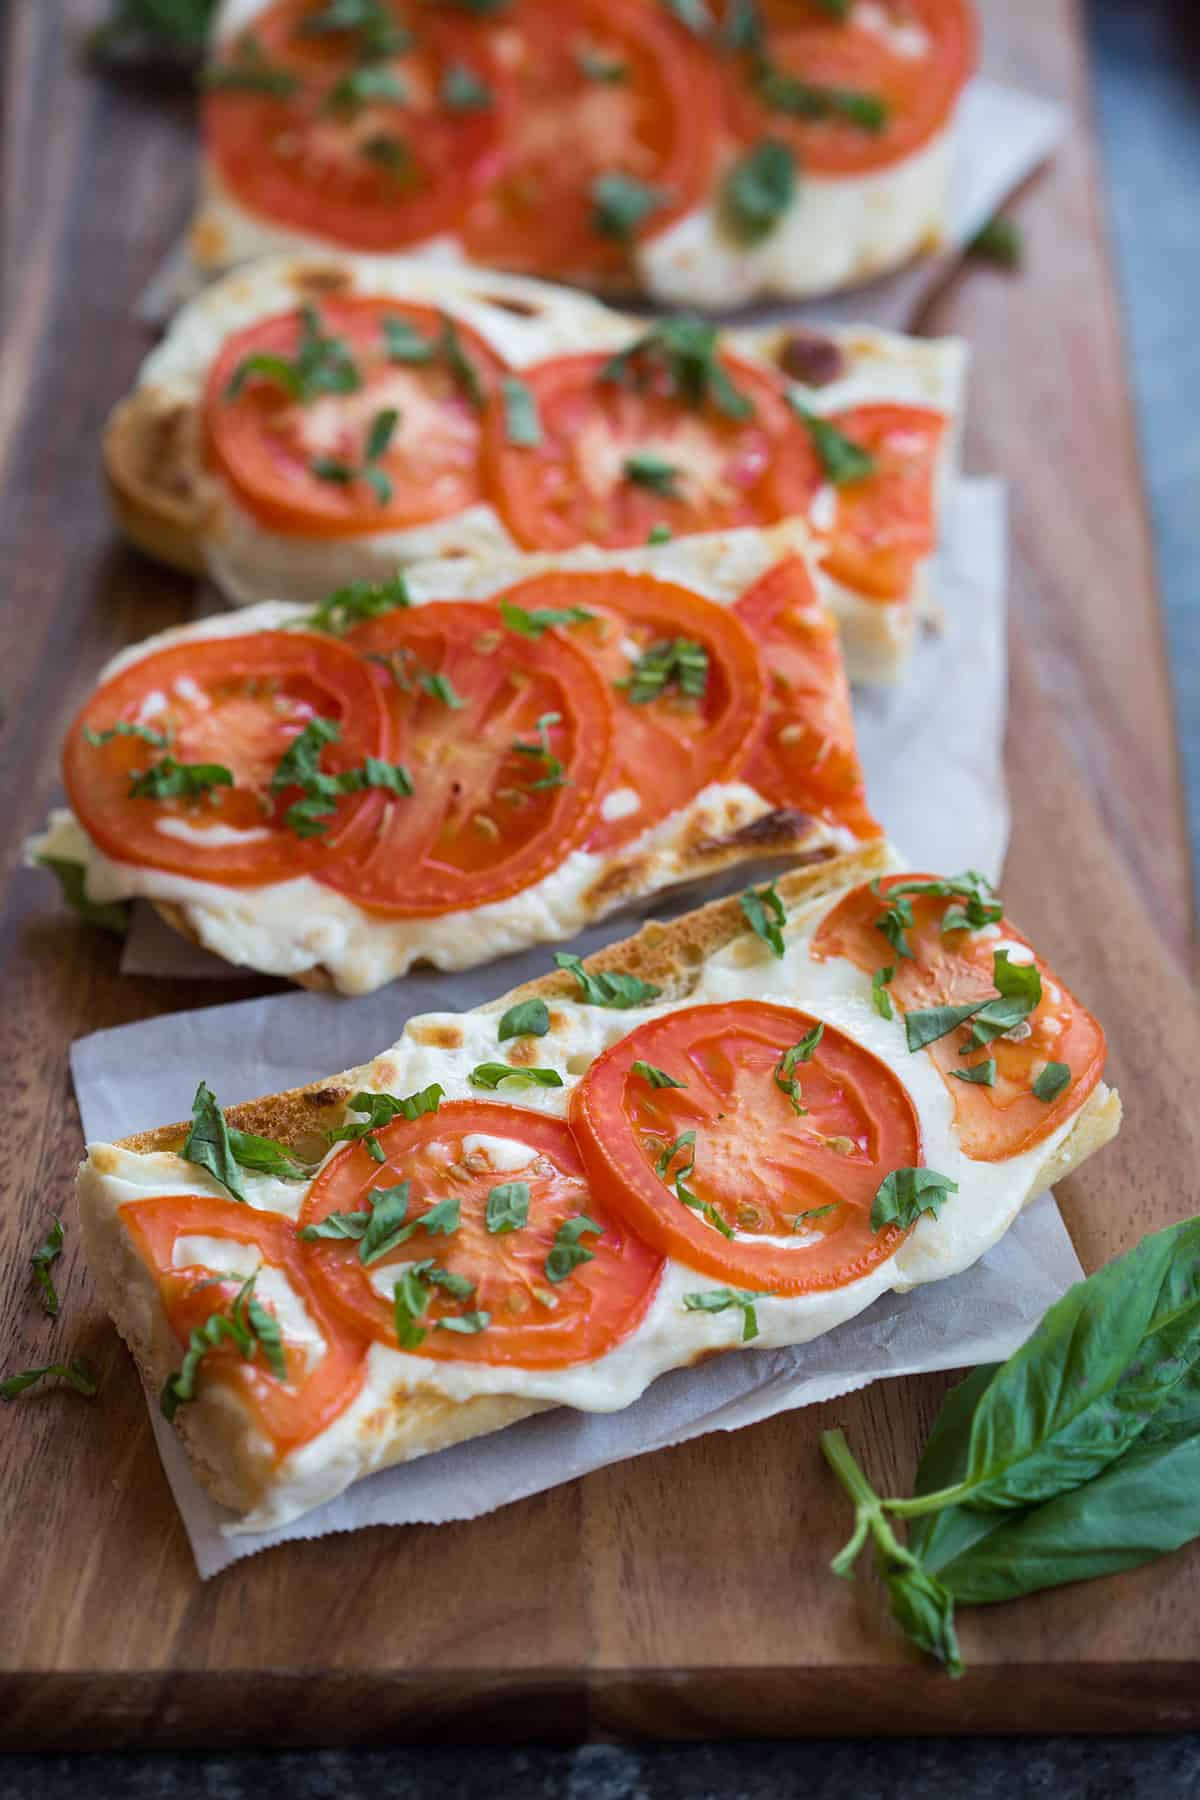 Tomato and Basil toasts covered in melted mozzarella cheese, sliced tomatoes, and sprinkled with fresh basil.